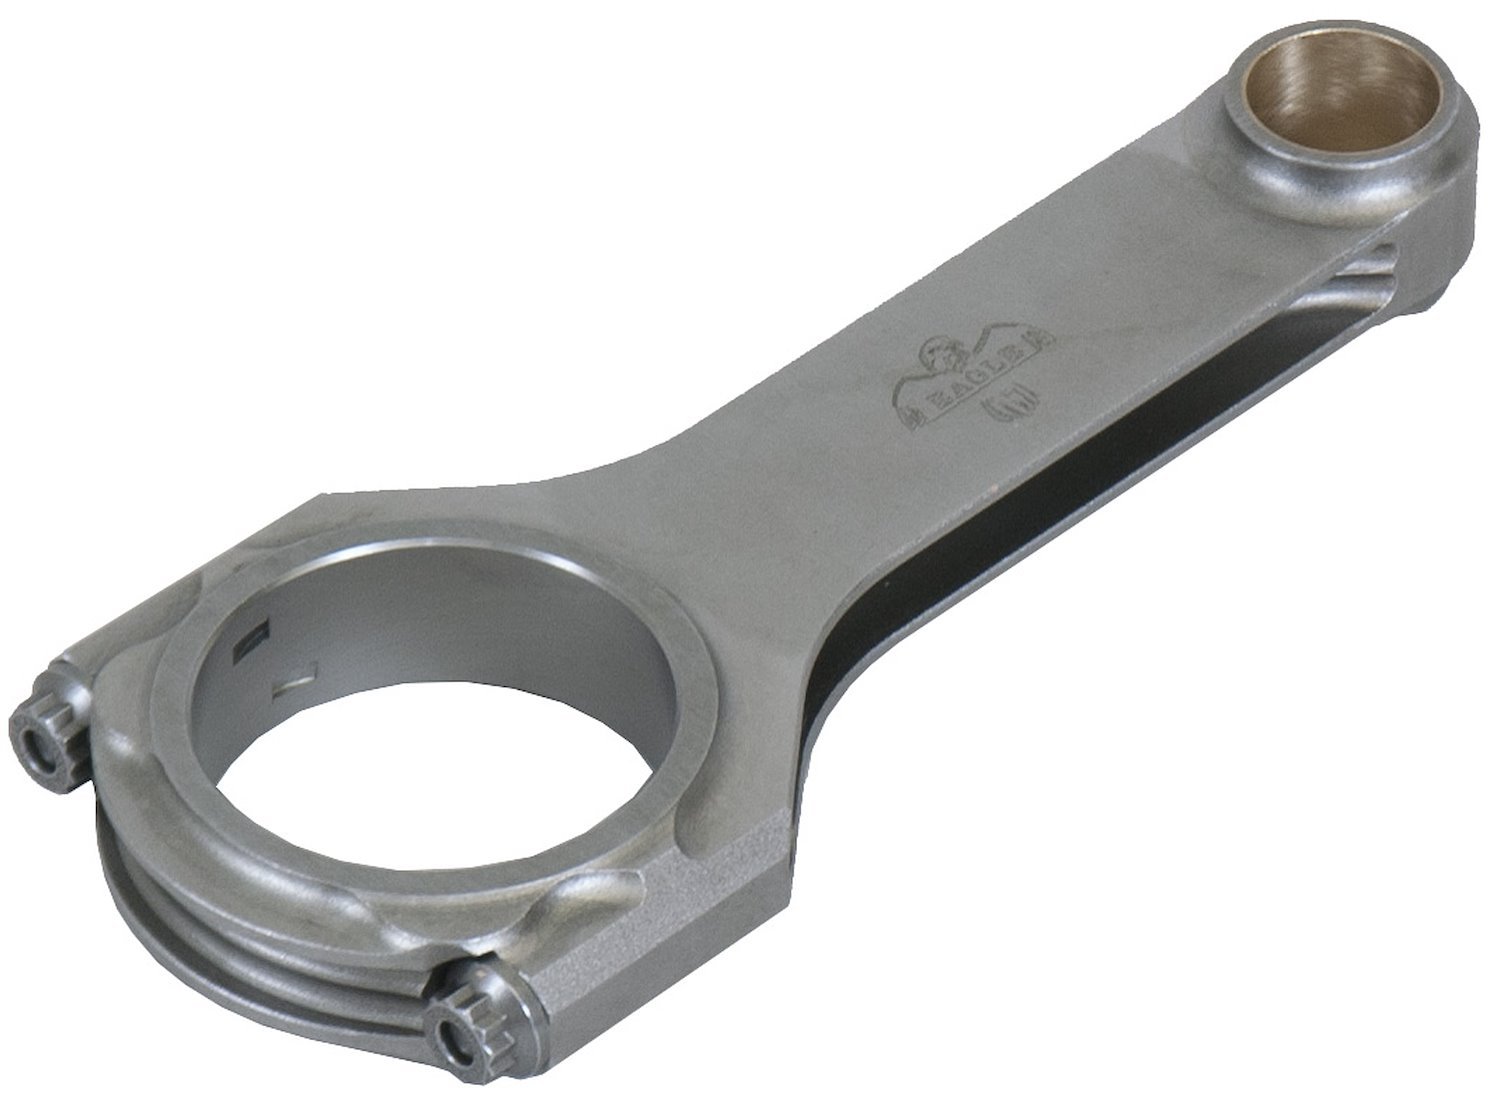 CRS6000B4D-1 H-Beam 4th Generation Design (4D) 6 in. Forged Steel Connecting Rod for Chevy Small Block Engines